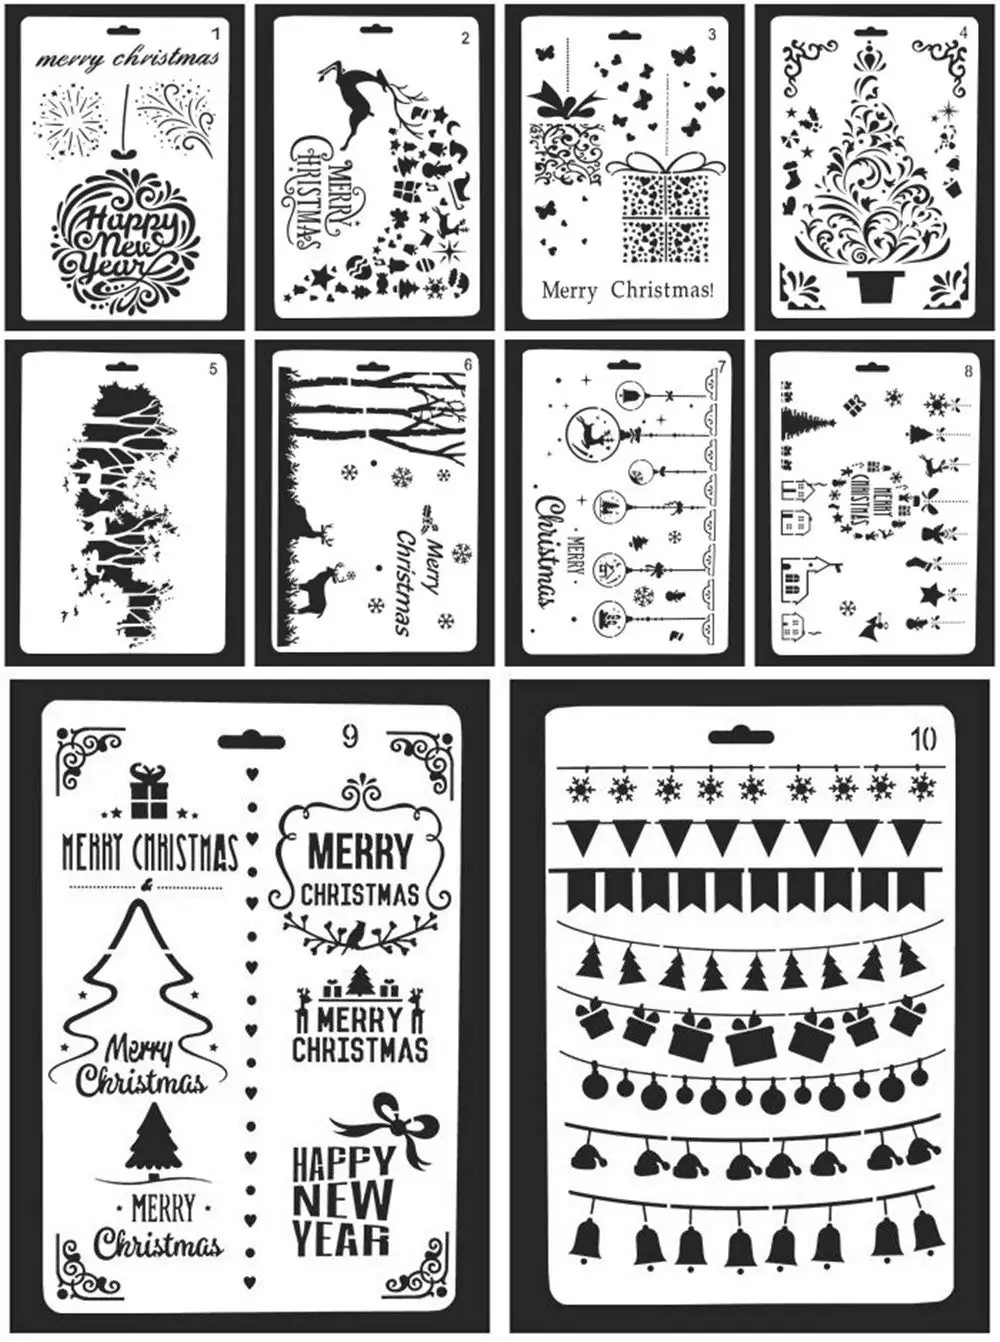 13*13cm PERFETSELL 16 PCS Christmas Stencils Template Xmas Stencils for Crafts Reusable Christmas Tree/ Santa/ Snowflake Plastic Drawing Painting Stencils for Painting Journal Scrapbook Card Making 